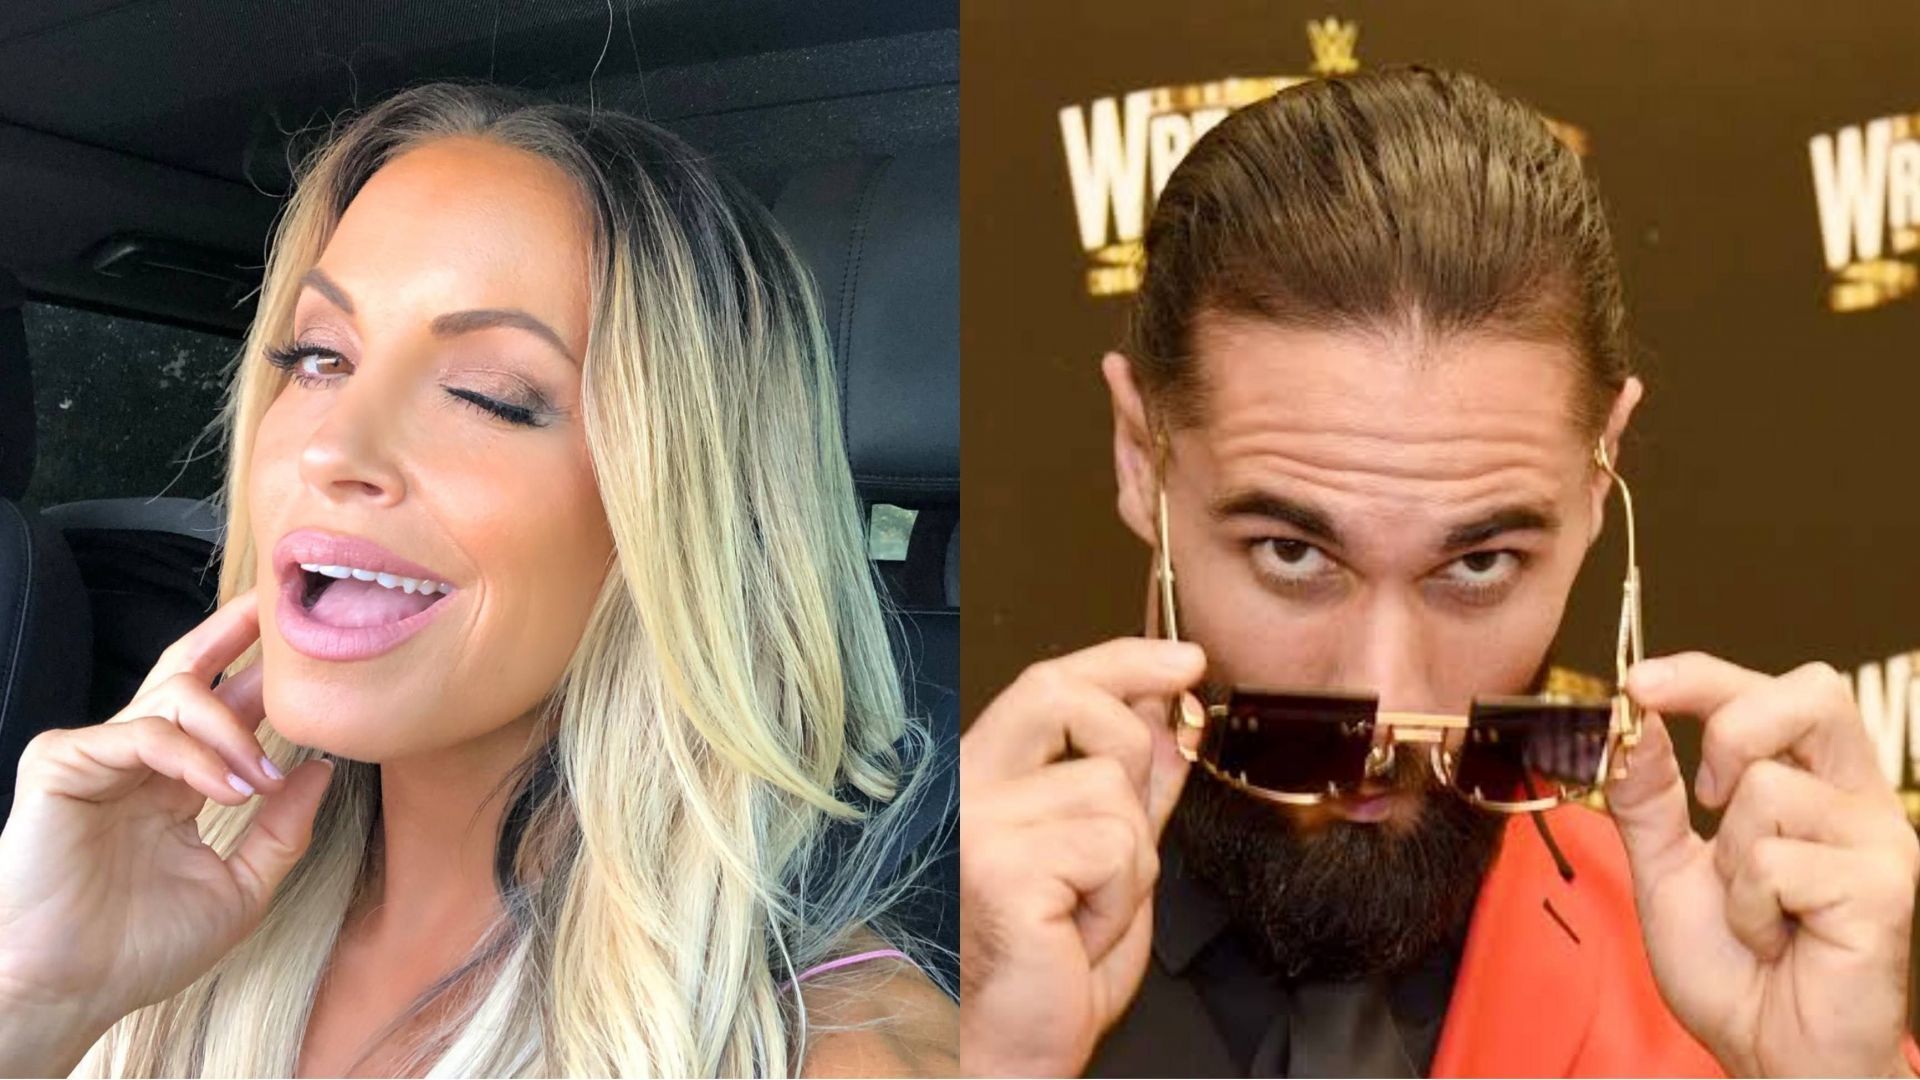 Top WWE Superstars Trish Stratus (left) and Seth Rollins (right)